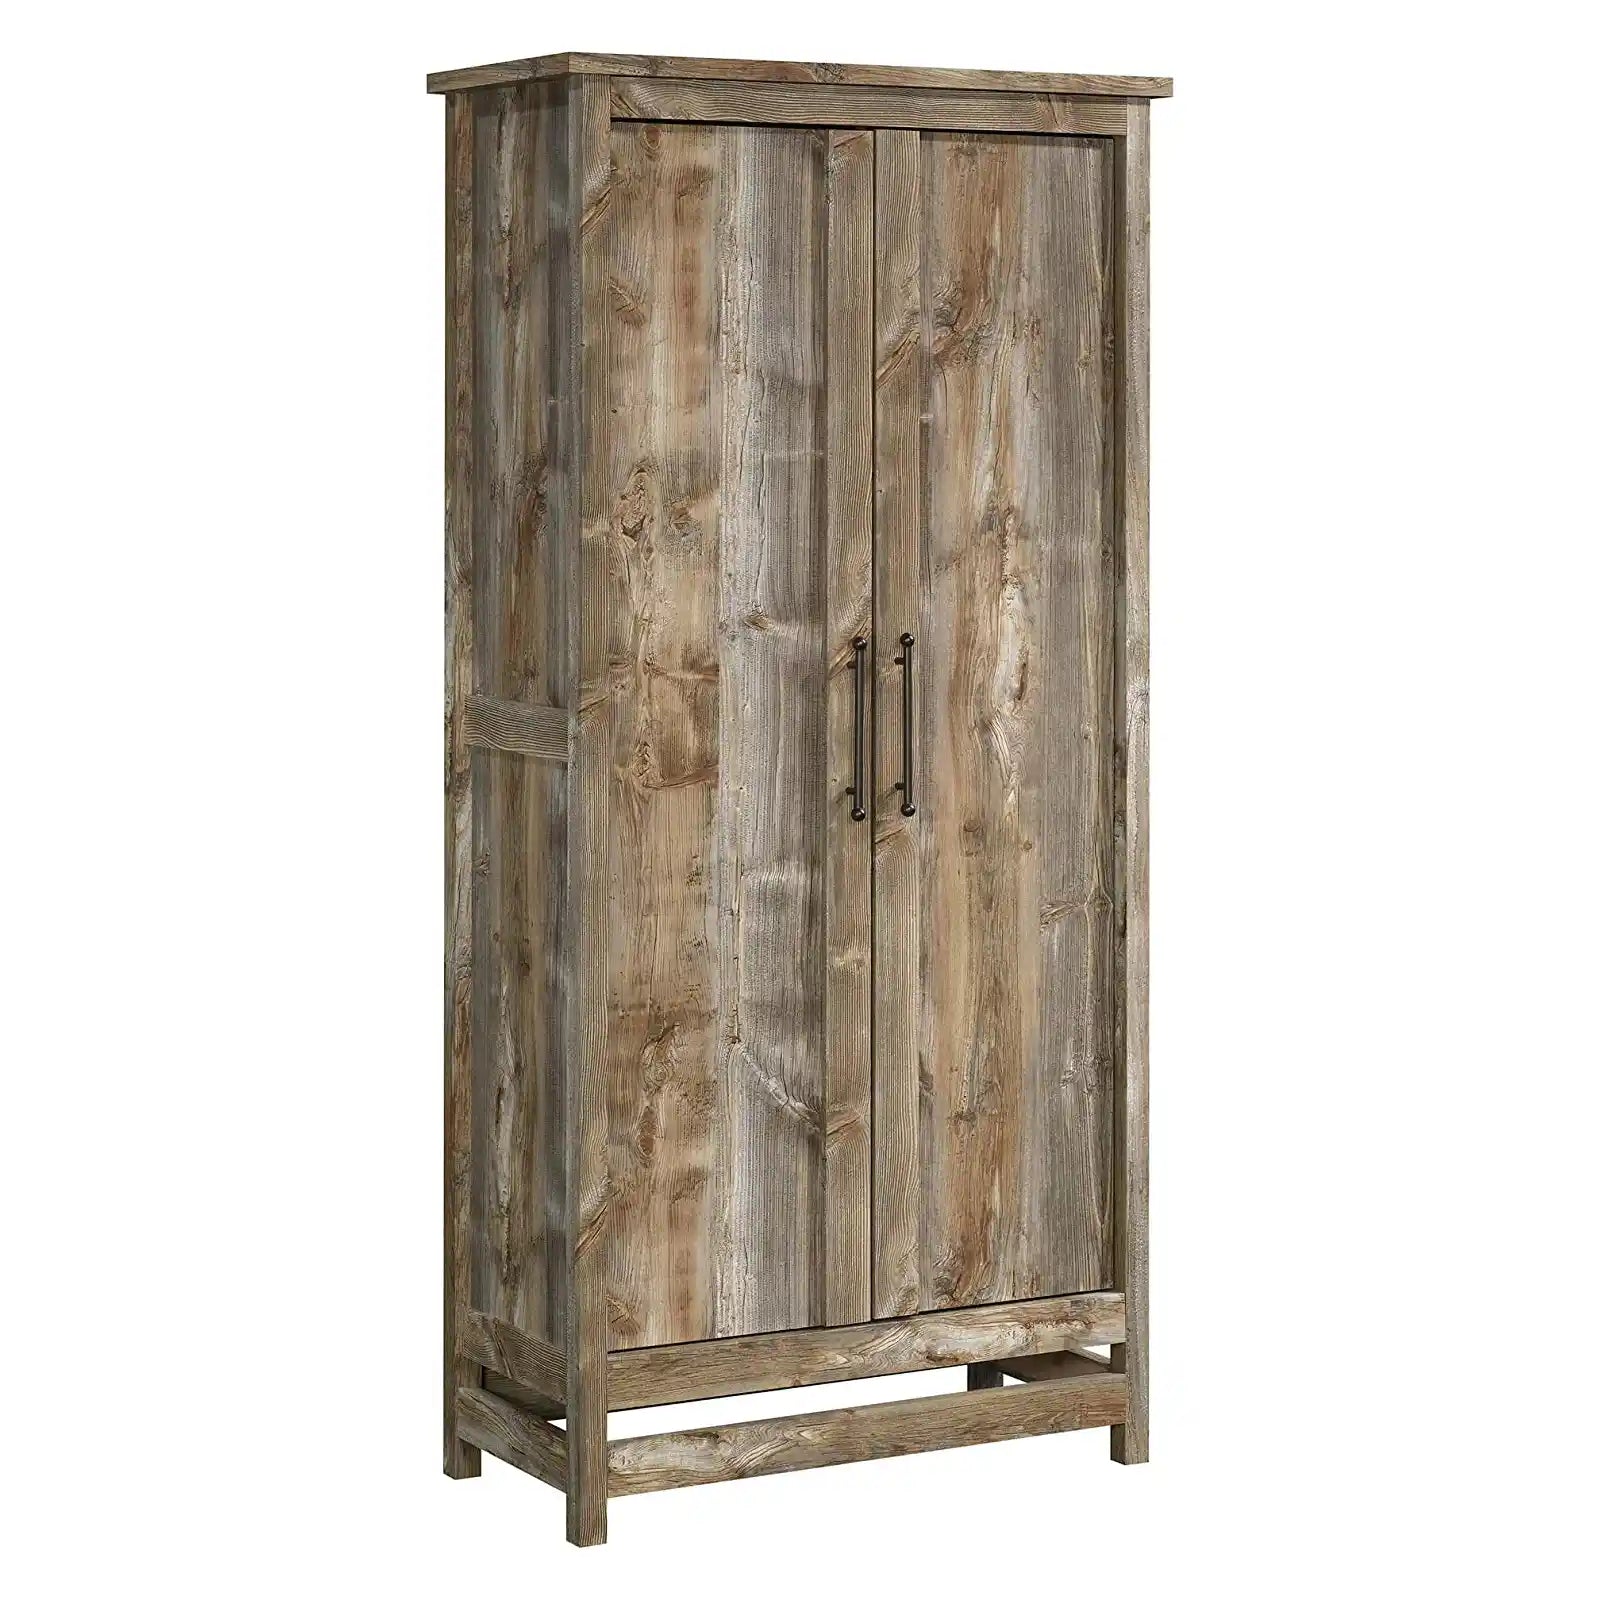 Rustic Storage Cabinet for Bedroom , Living Room , Office , Entryway